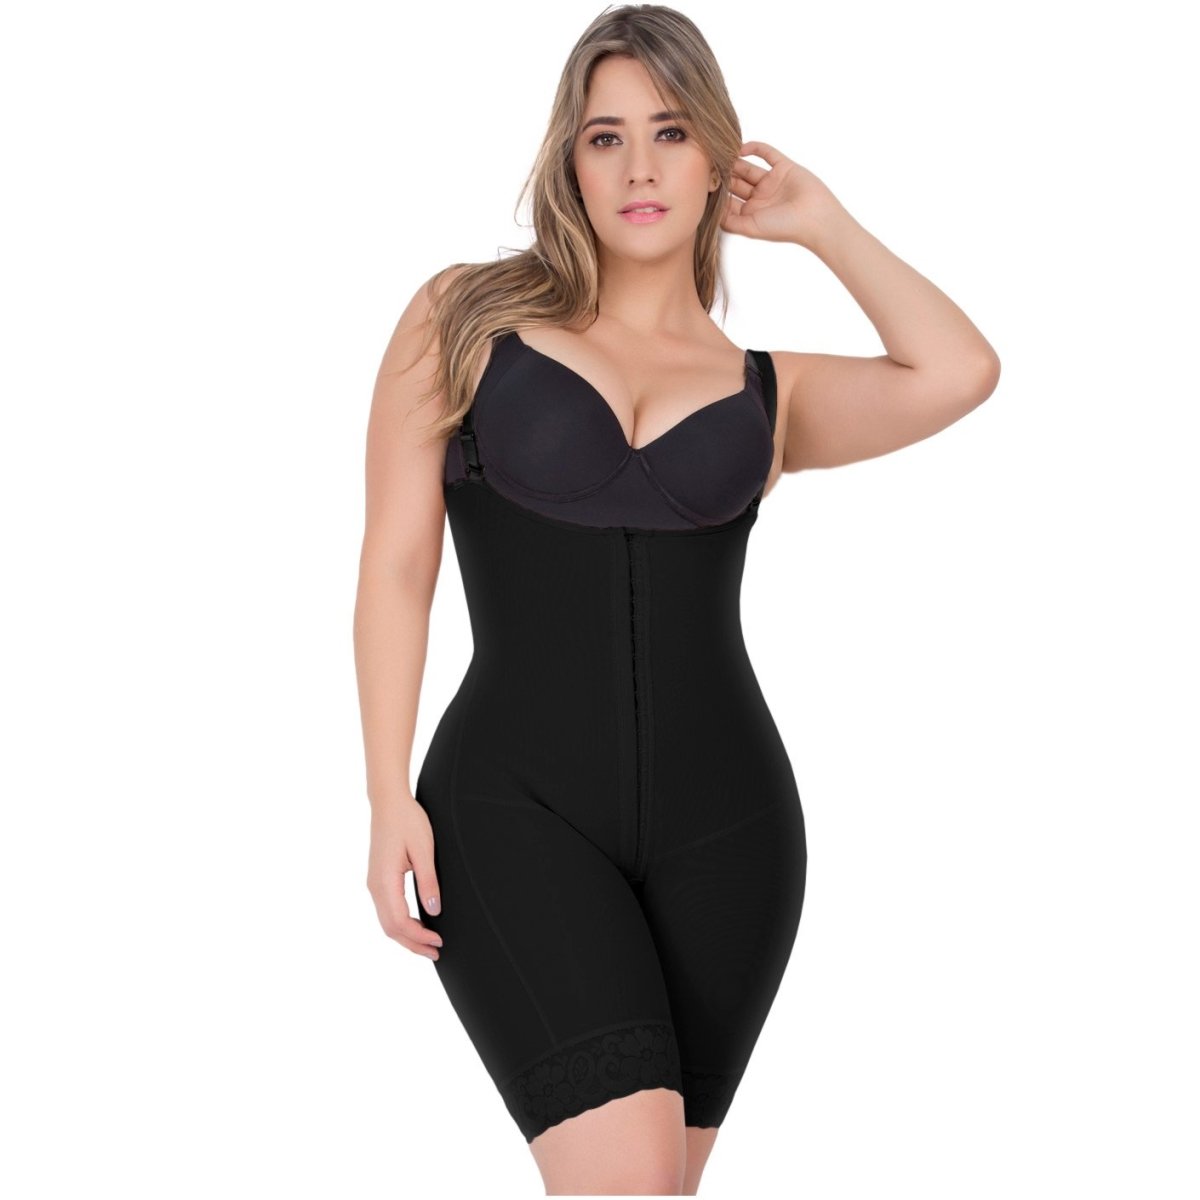 SONRYSE 095ZF | Colombian Butt Lifter Strapless Shapewear Bodysuit |  Postpartum and Daily Use